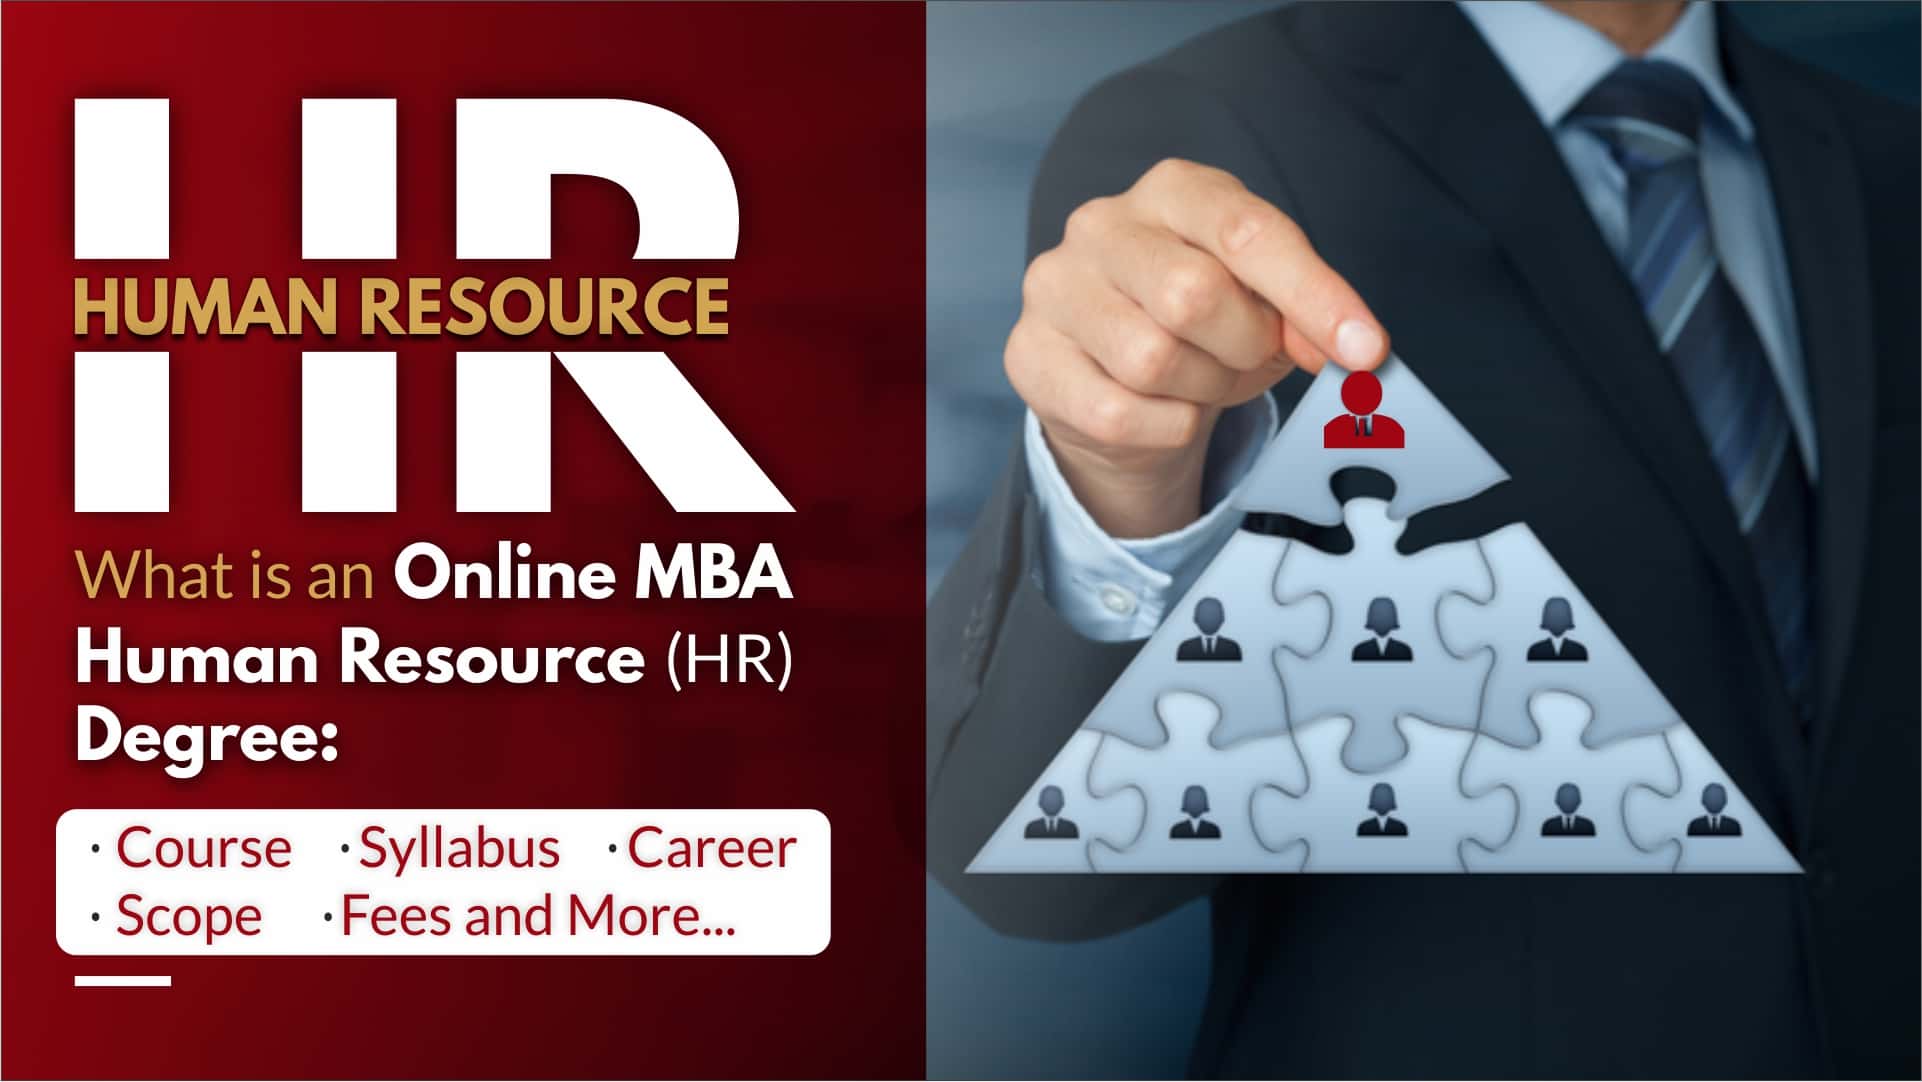 What is an Online MBA Human Resource (HR) Degree: Course, Syllabus, Career, Scope, Fees & More